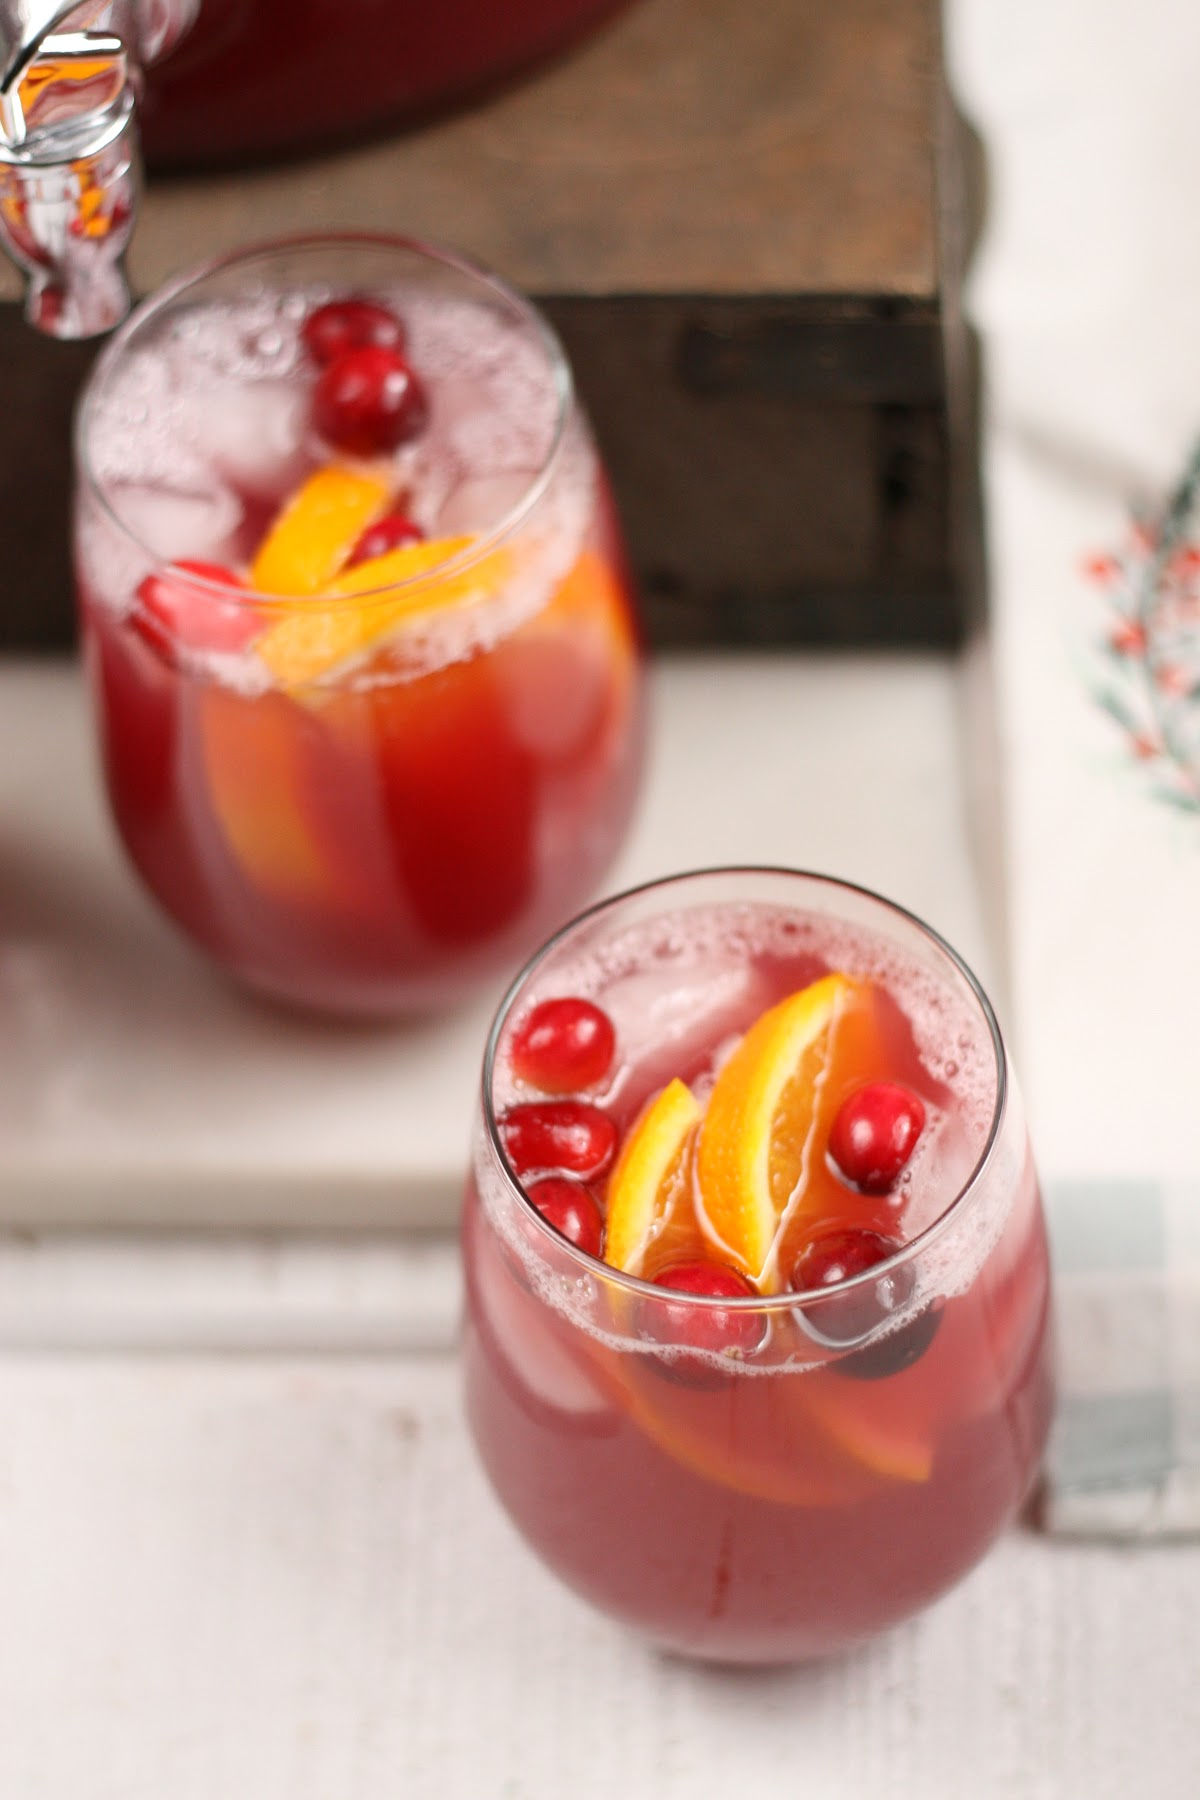 Two stemless glasses of holiday punch, cranberries and orange slices, ice cubes in glassses.